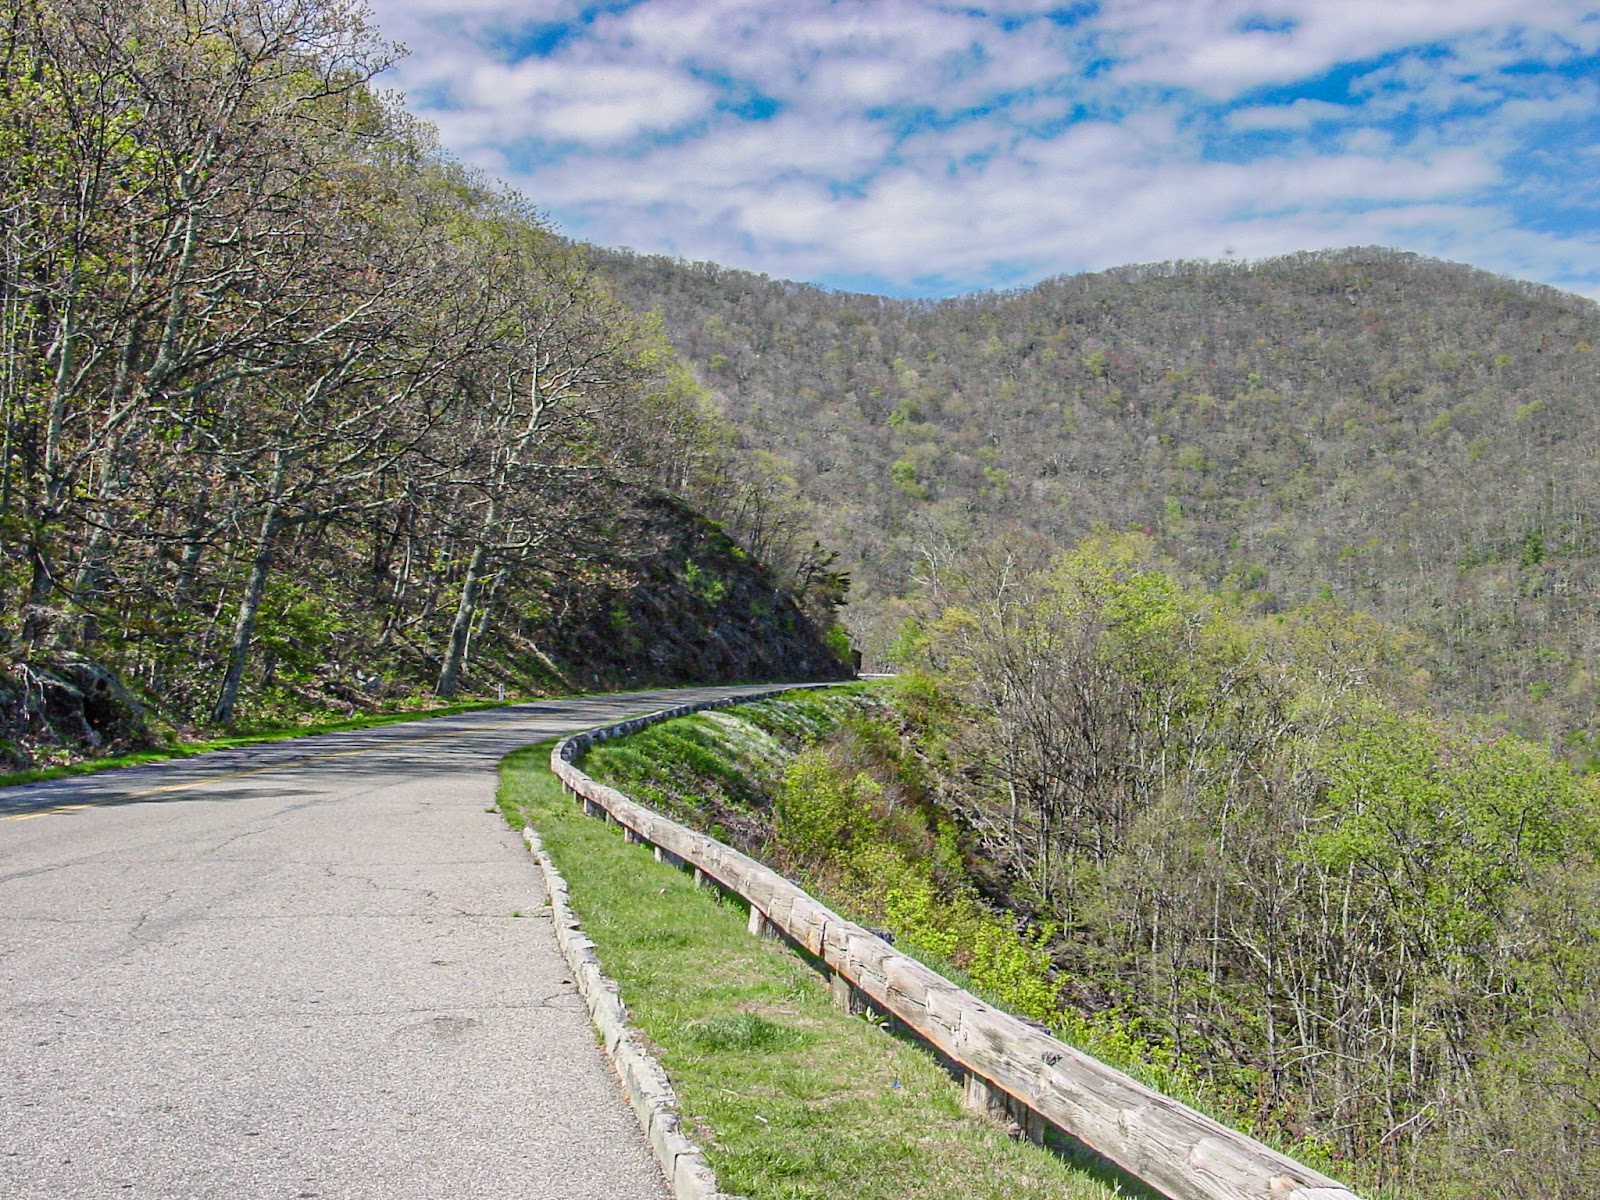 A road curves up a mountain slope with a wooden guardrail. 